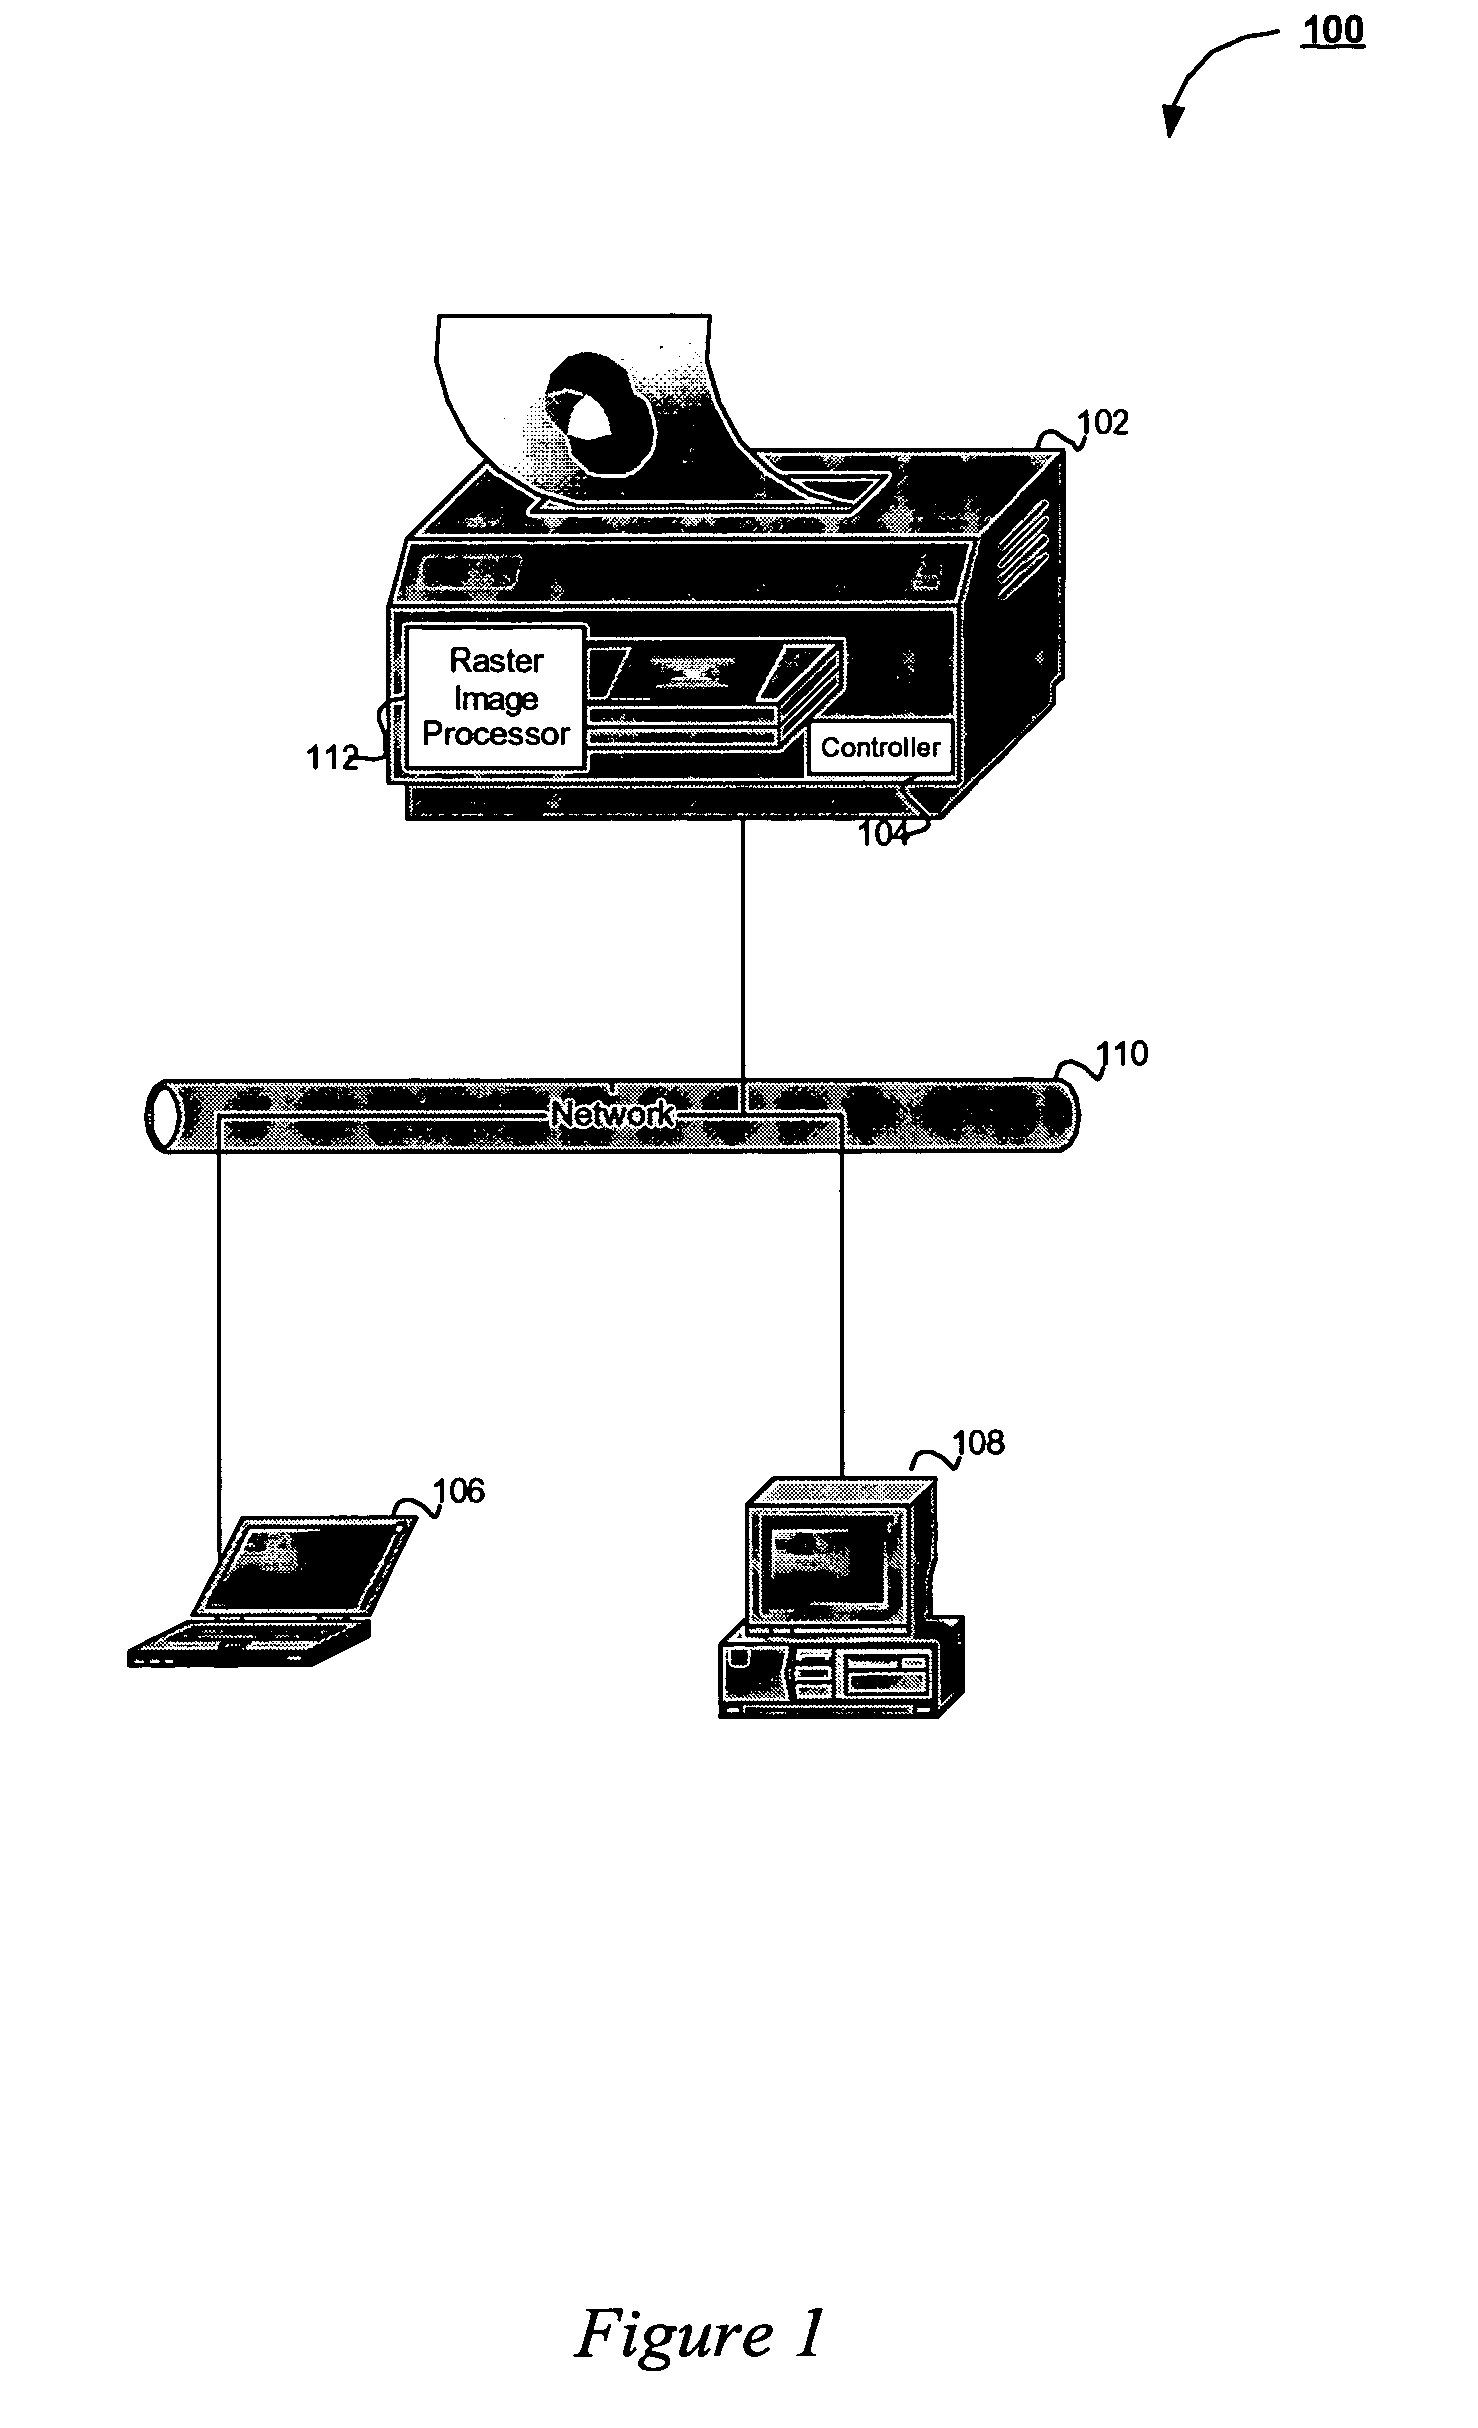 Method and apparatus for raster image processing